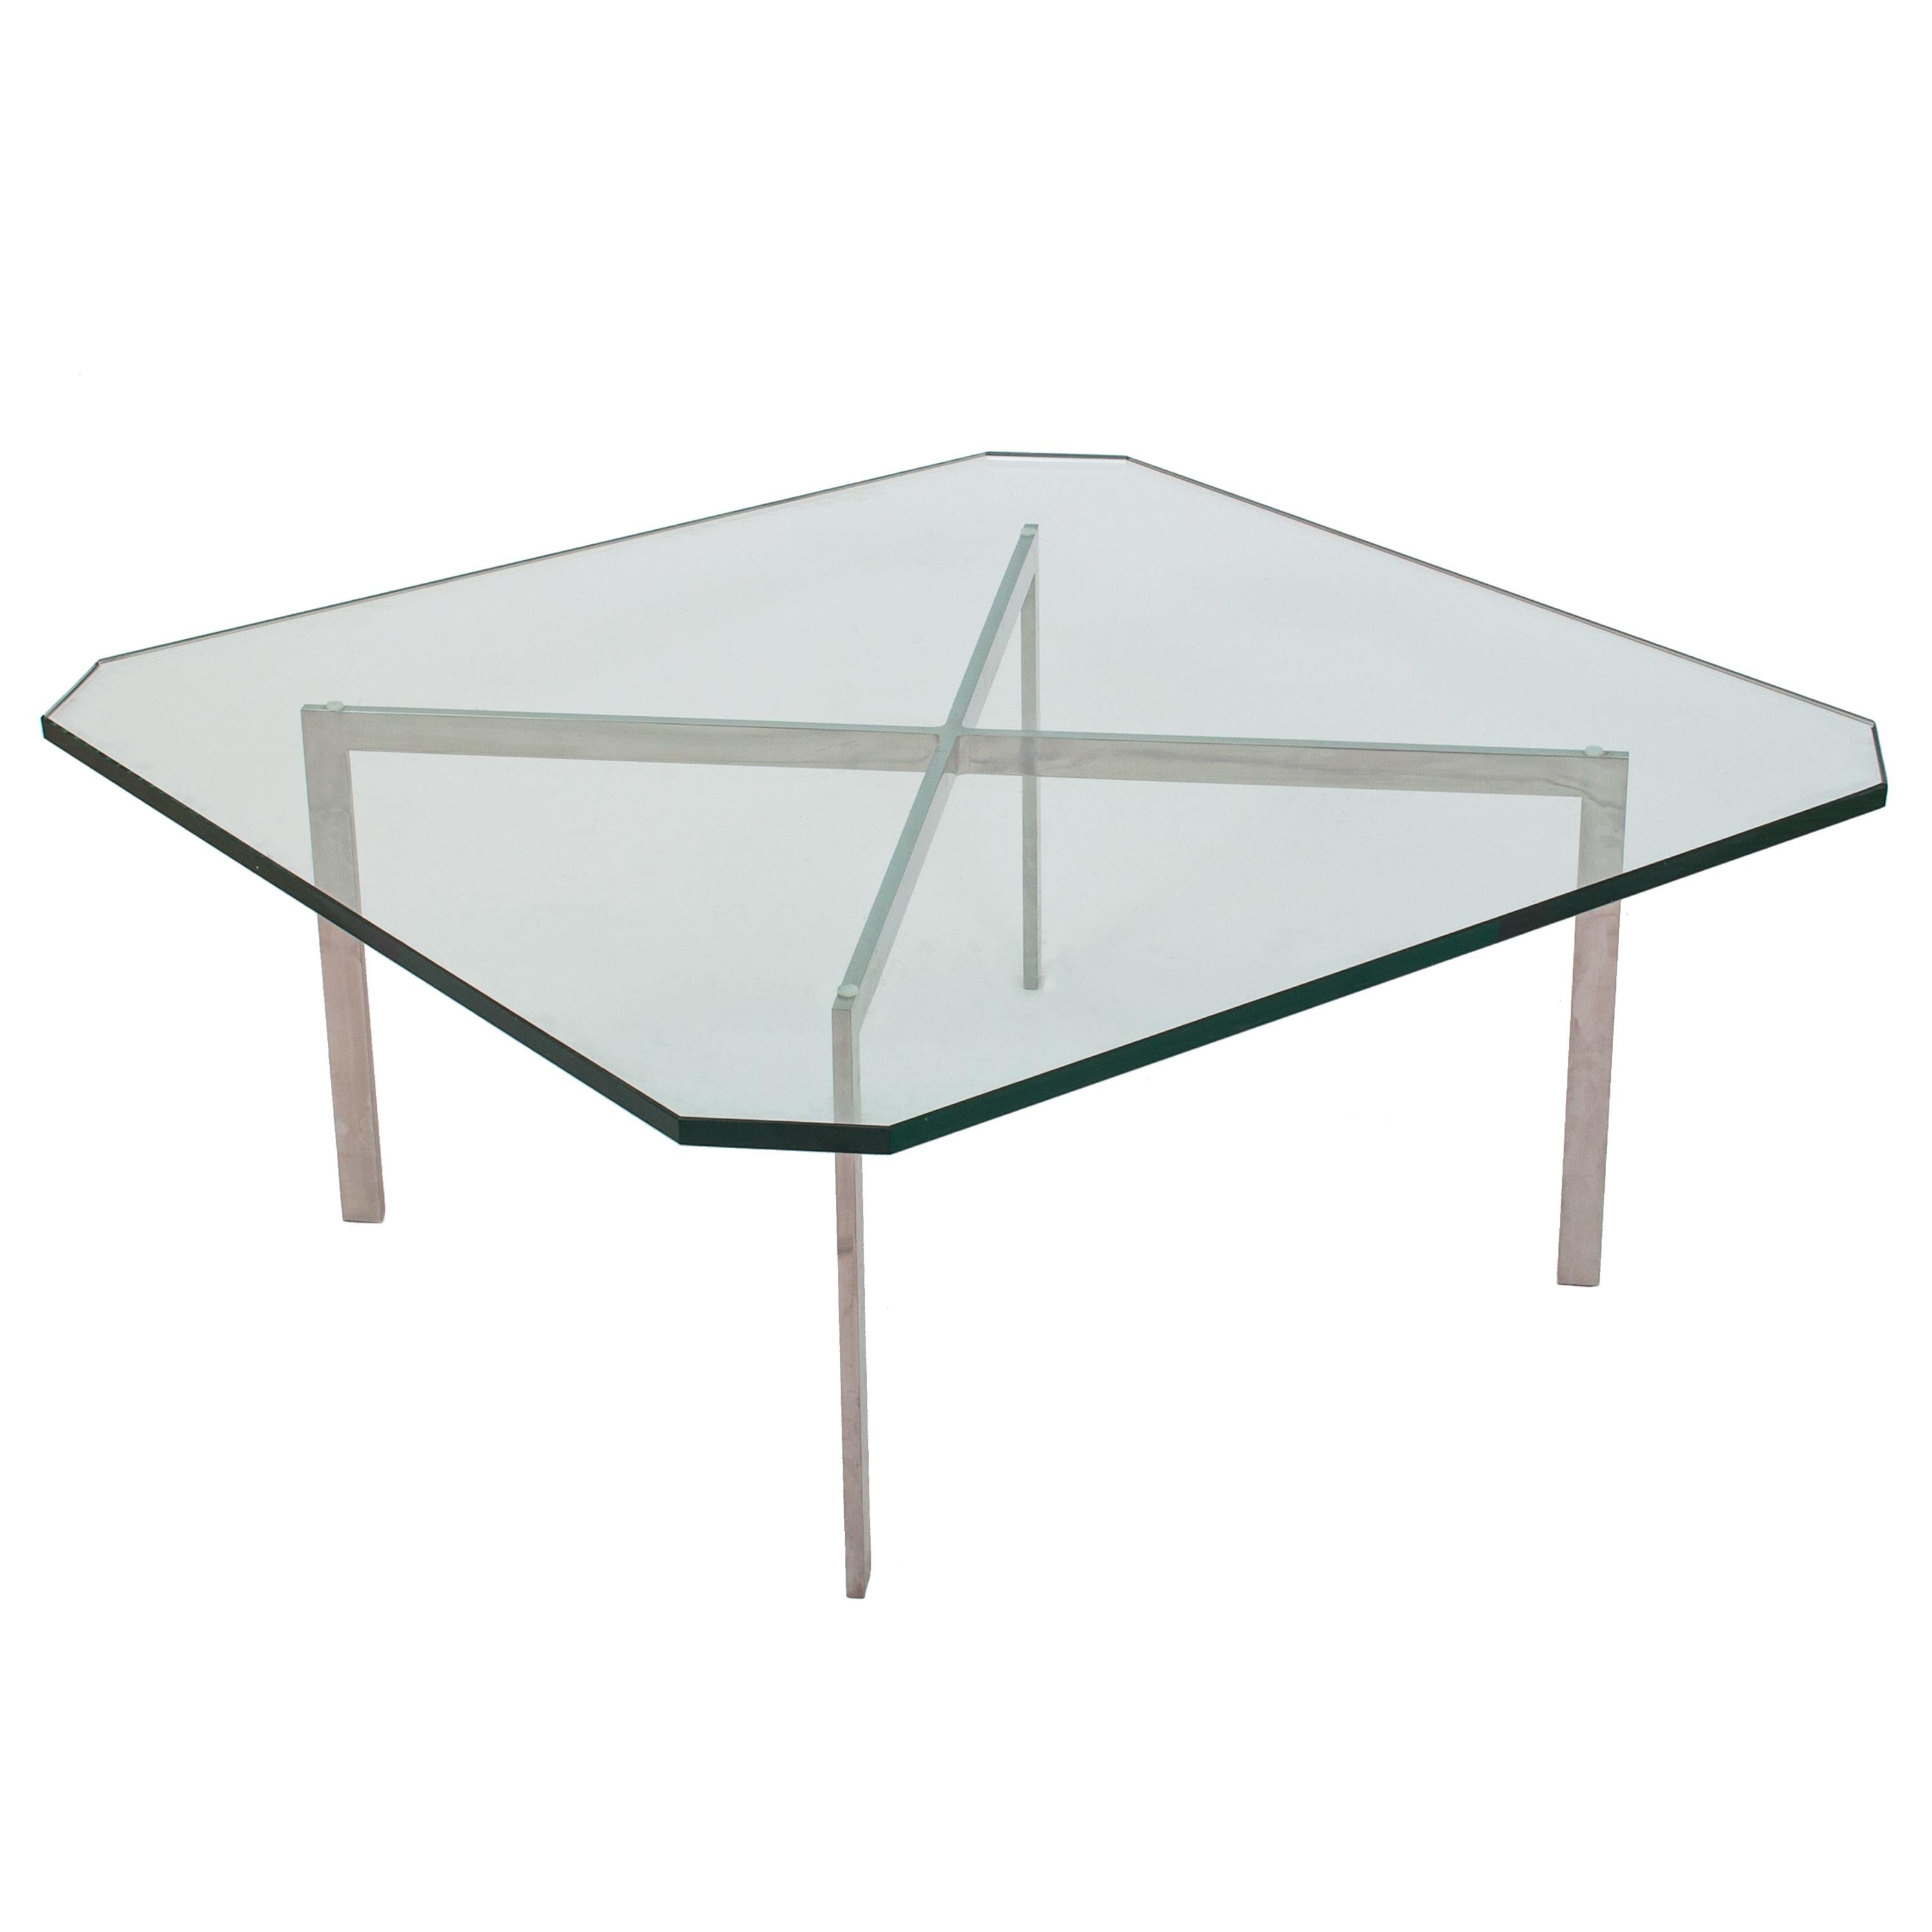 Mid Century Glass Stainless Steel Barcelona Table Mies Van Der Rohe Knoll 1955 In Good Condition For Sale In Portland, OR